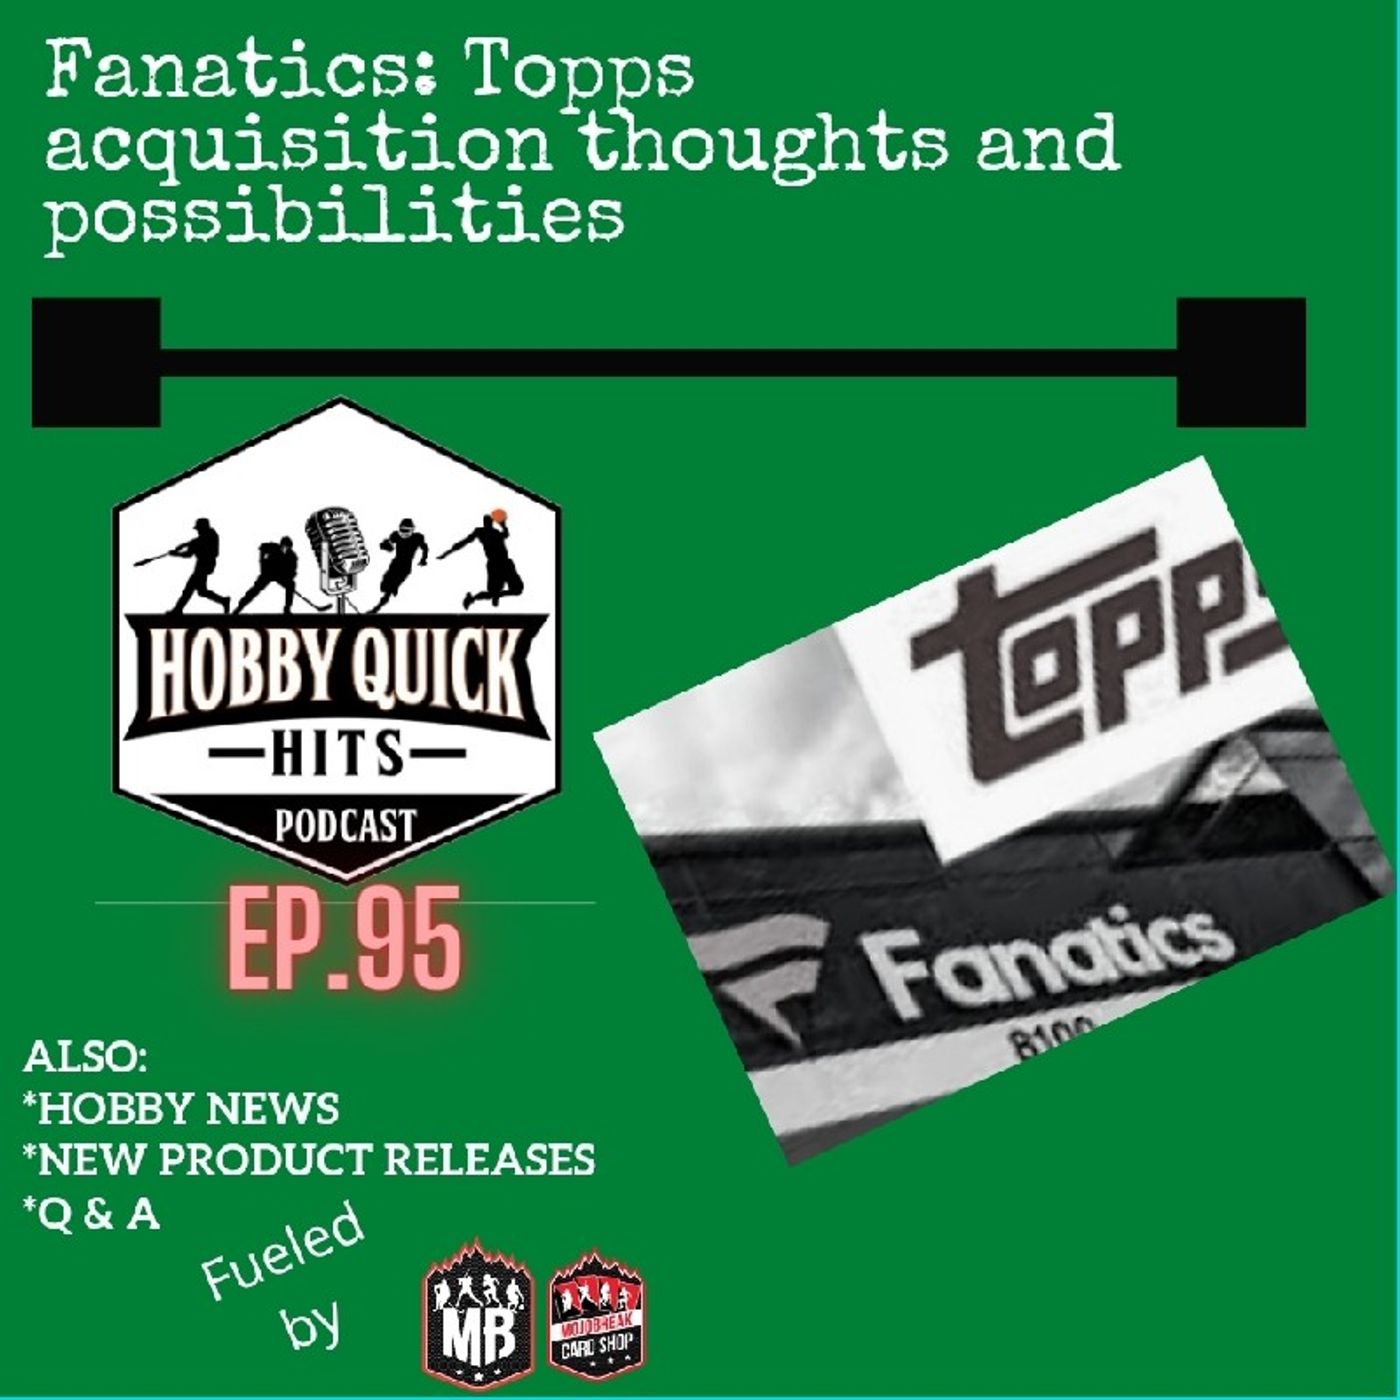 Hobby Quick Hits Ep.95 Fanatics acquires Topps: The Fallout & Possibilities